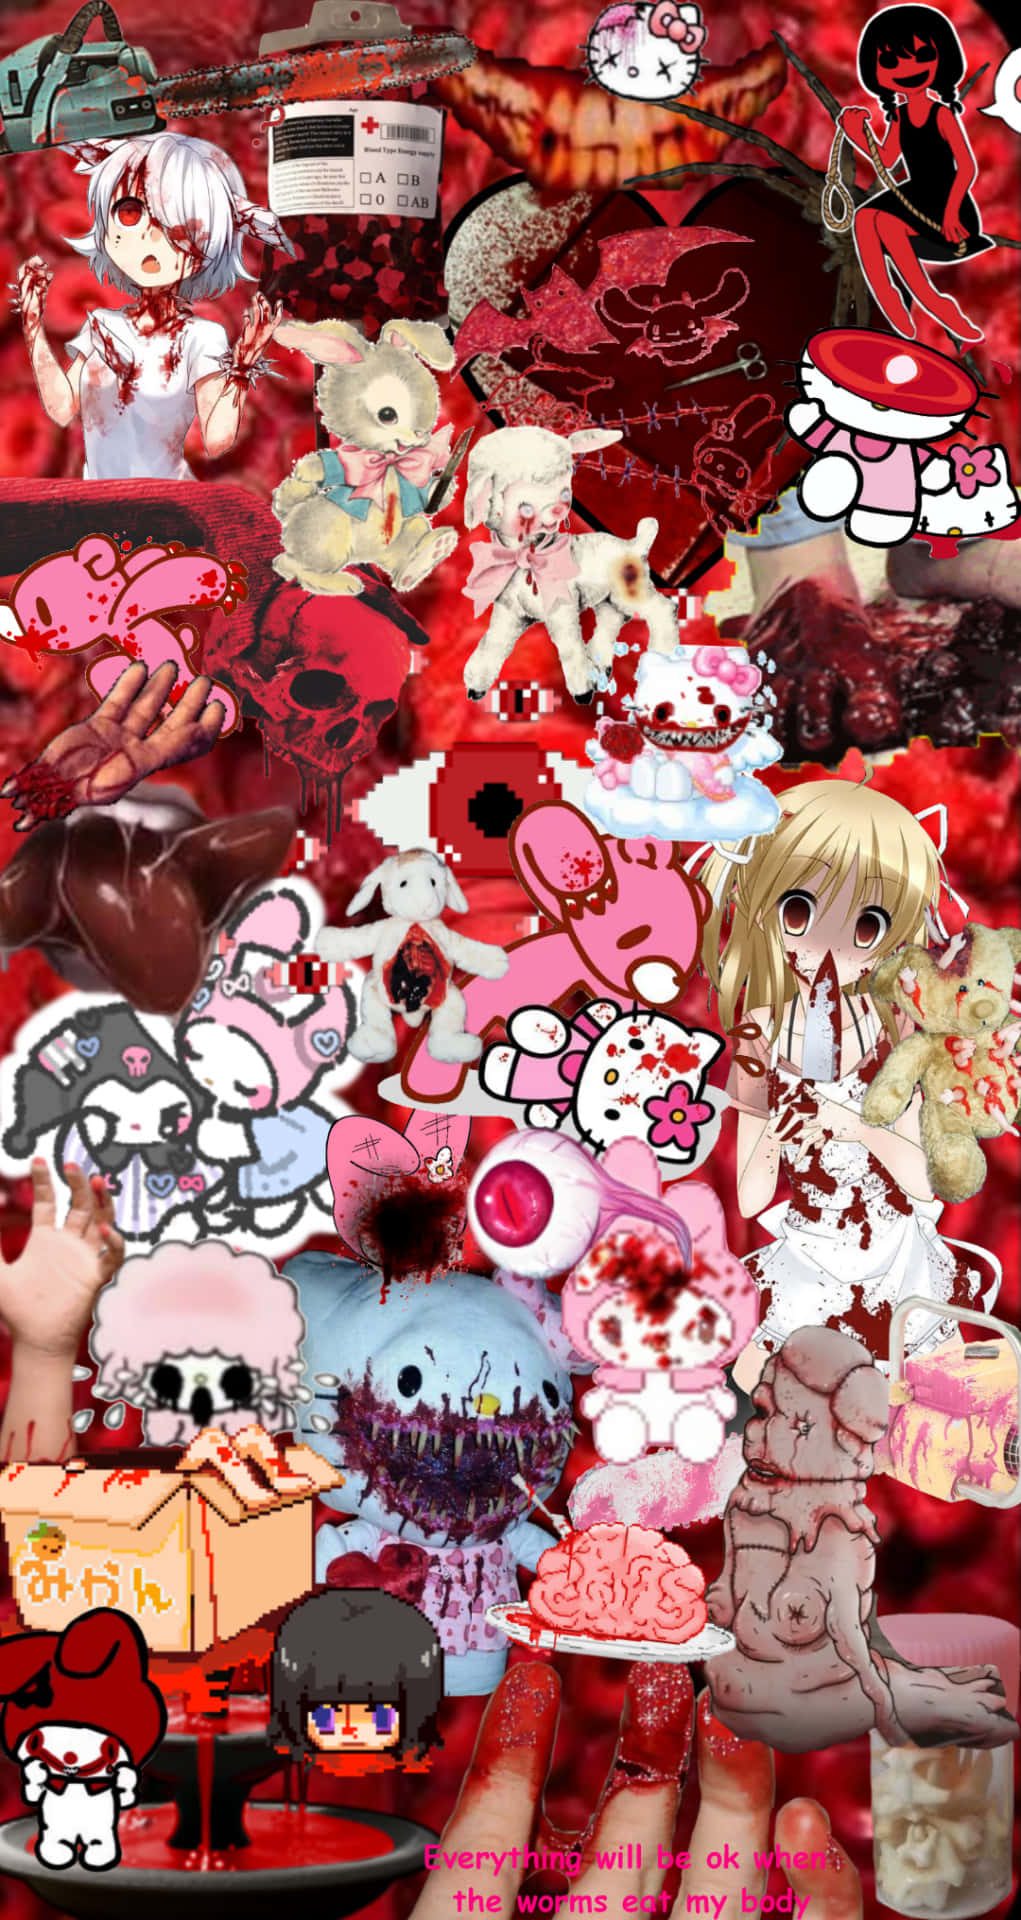 Gore Aesthetic Collage Wallpaper